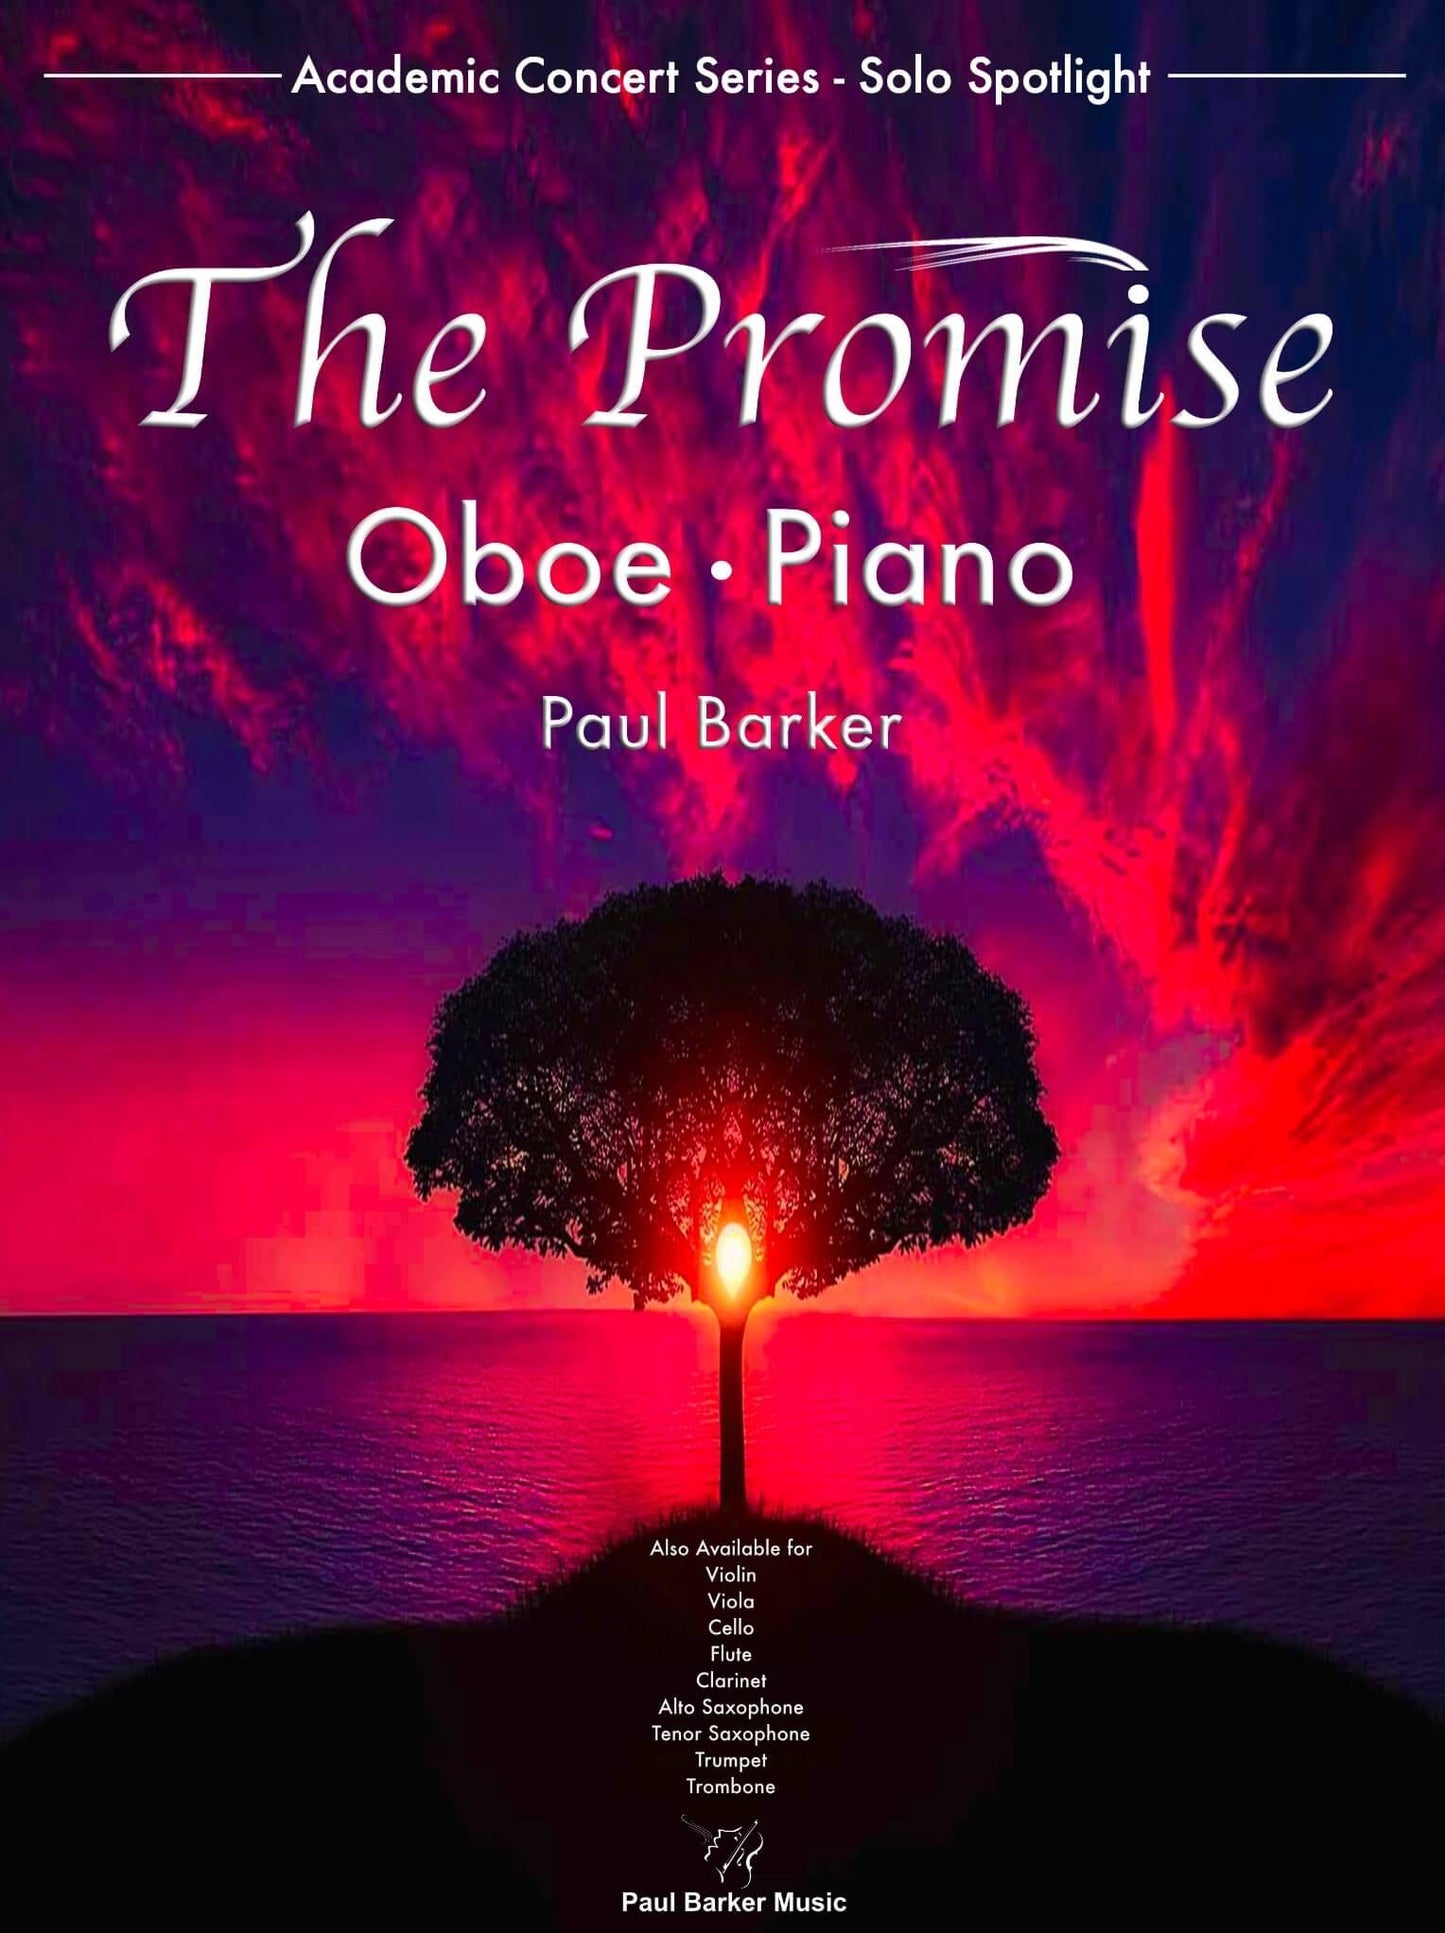 The Promise [Oboe & Piano] - Paul Barker Music 